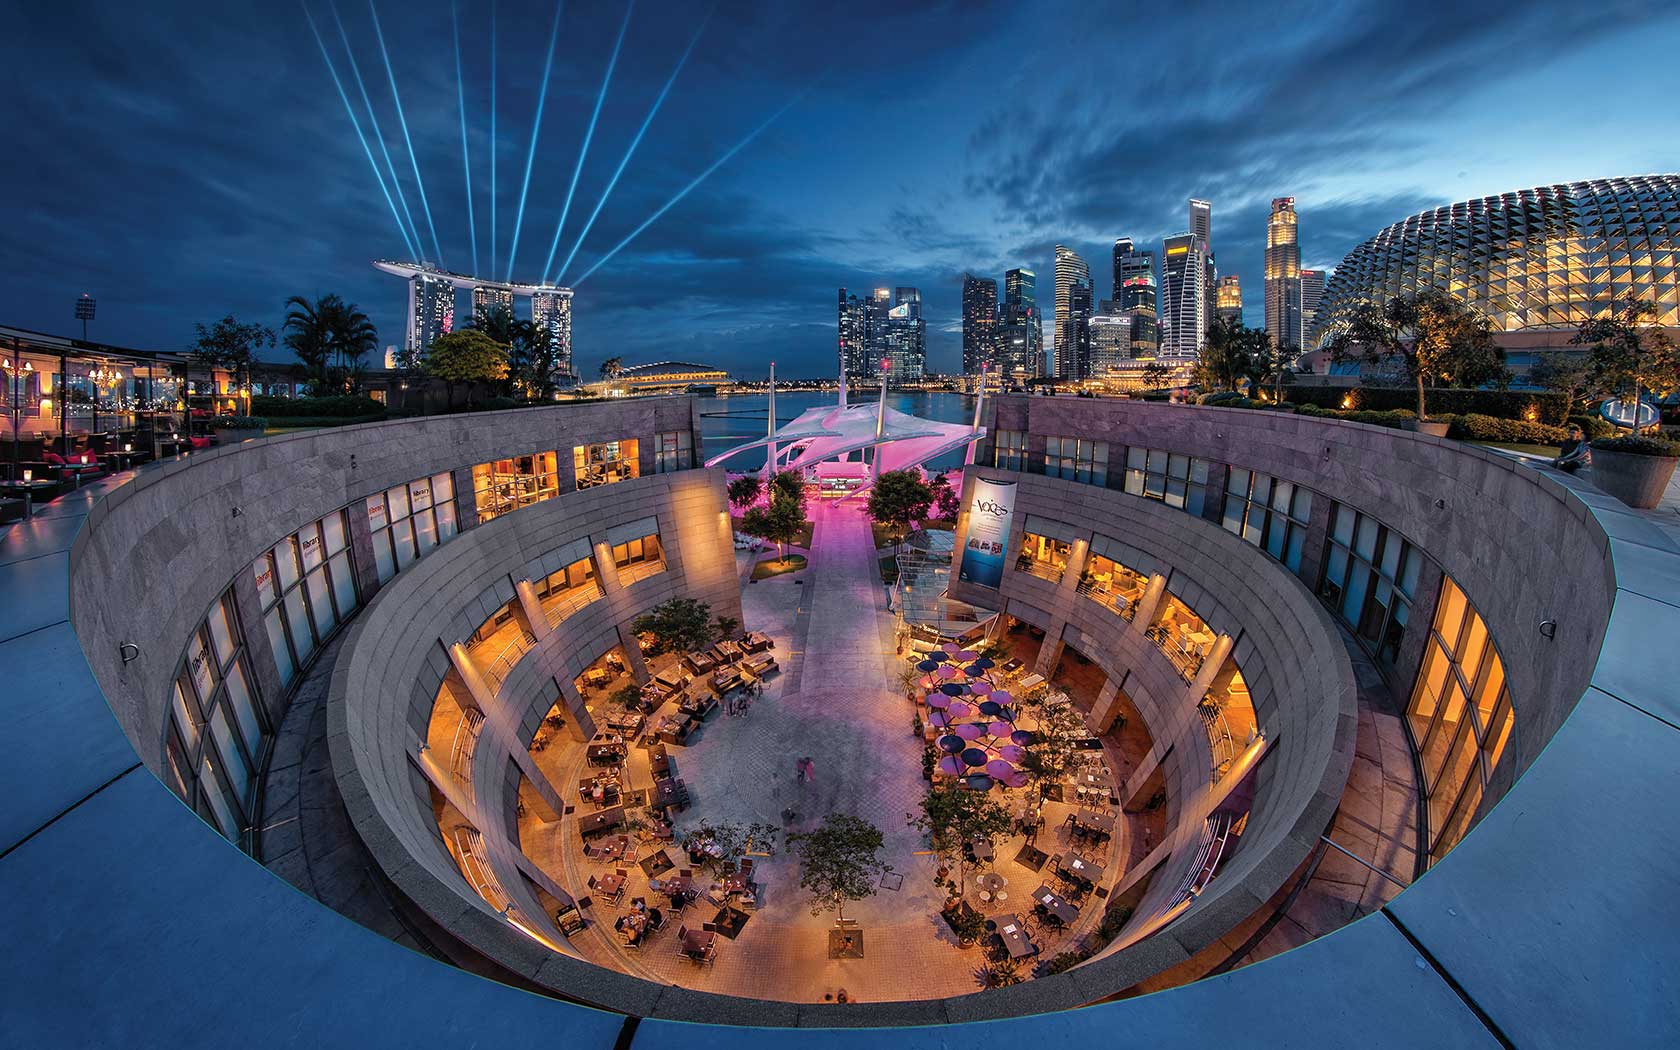 Image of courtyard at Esplanade against the city skyline taken from the Roof Terrace at night.